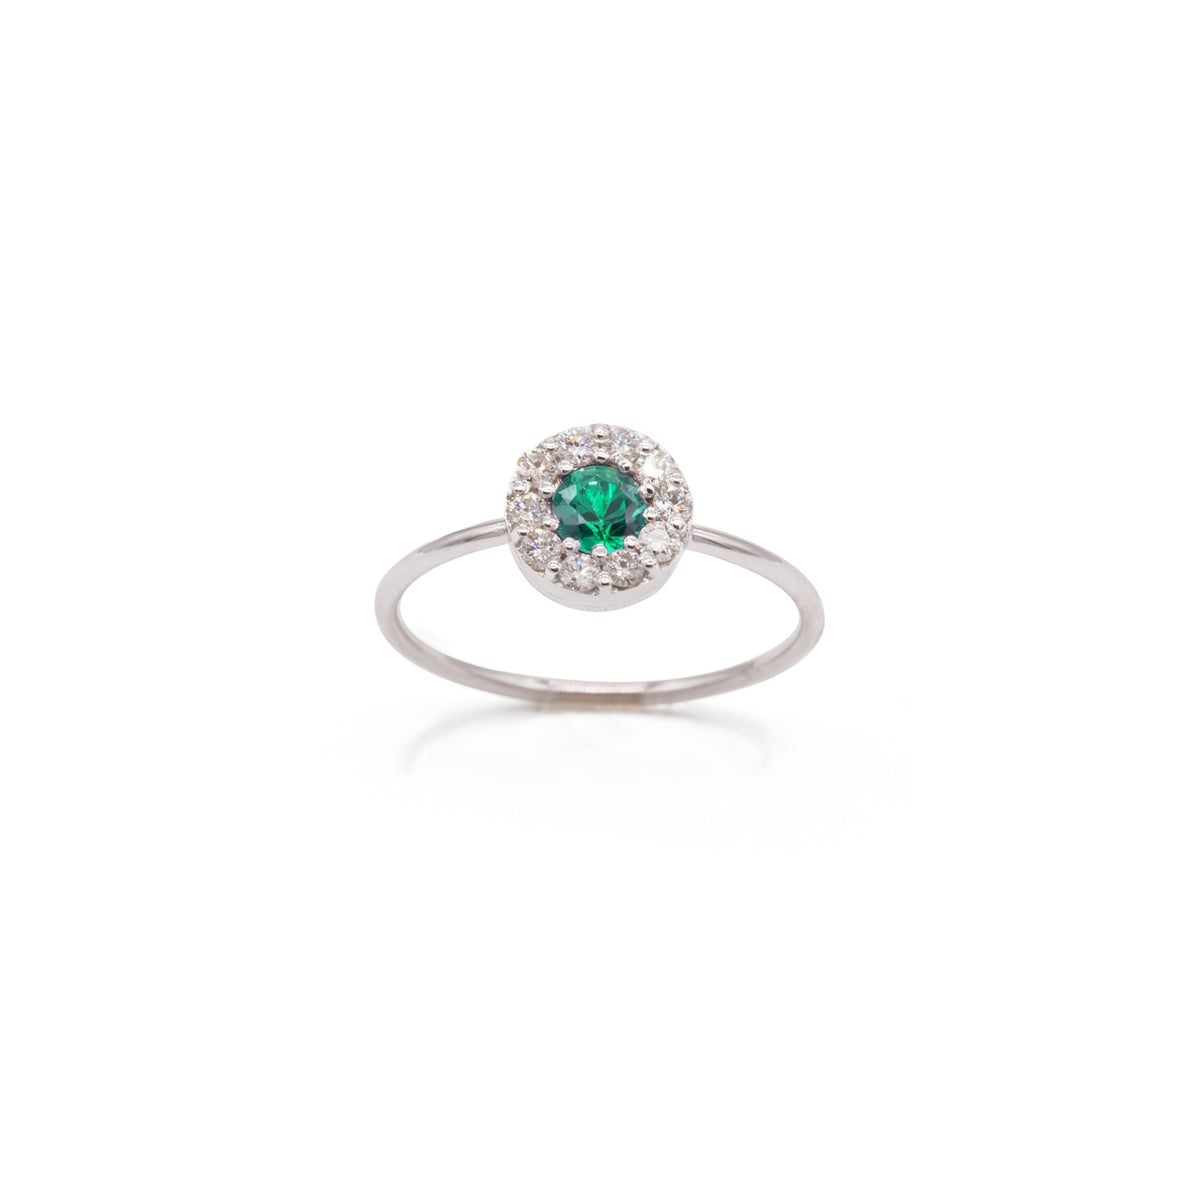 Thin ring with diamonds and emerald